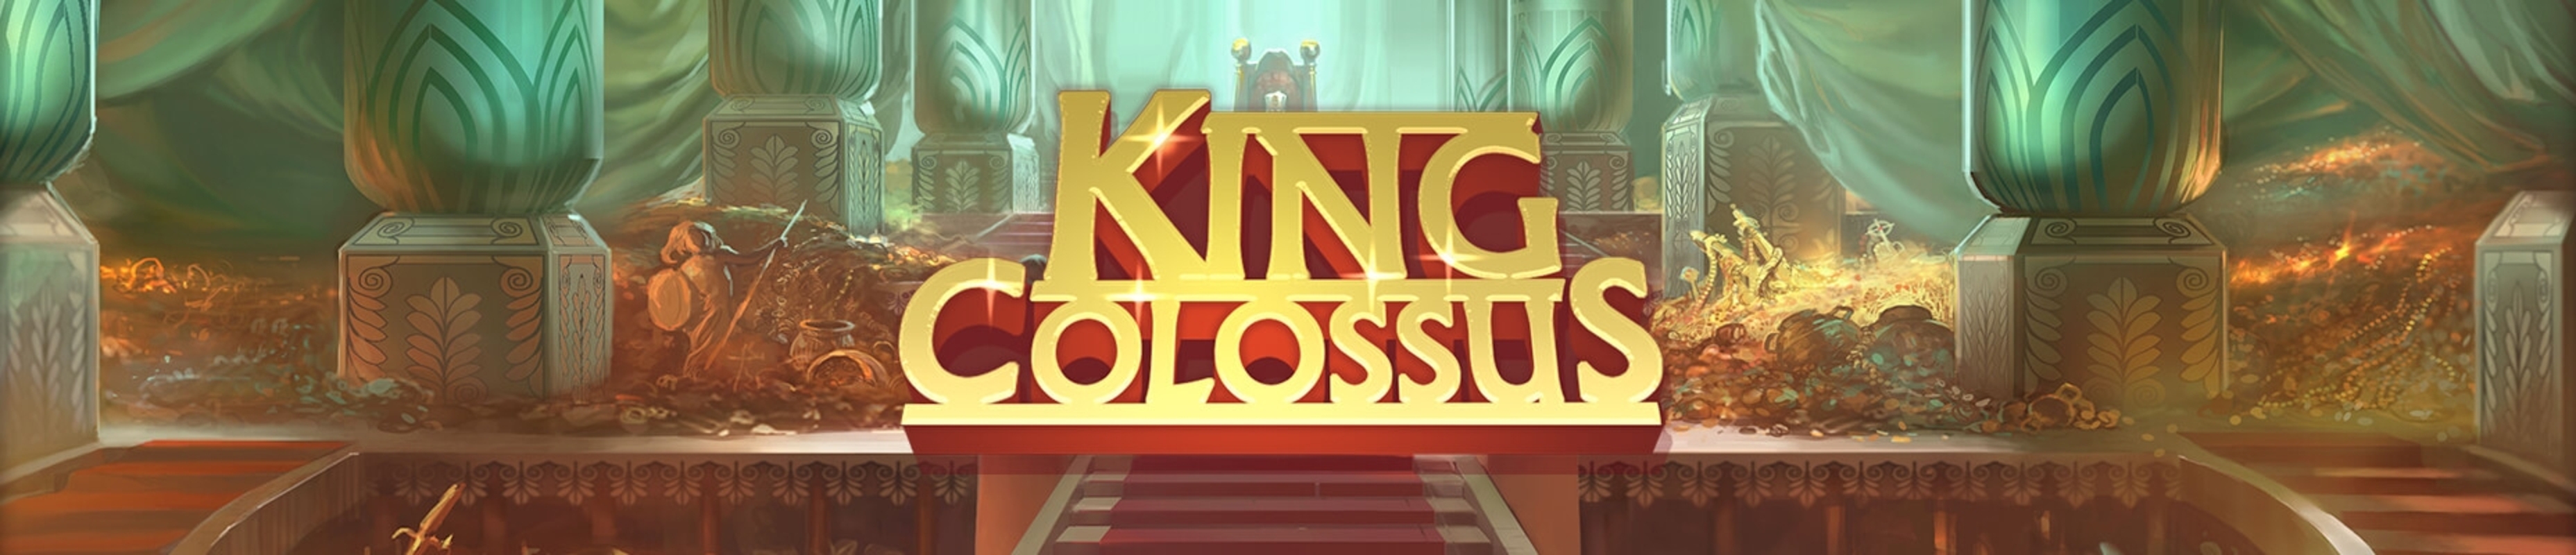 The King Colossus Online Slot Demo Game by Quickspin